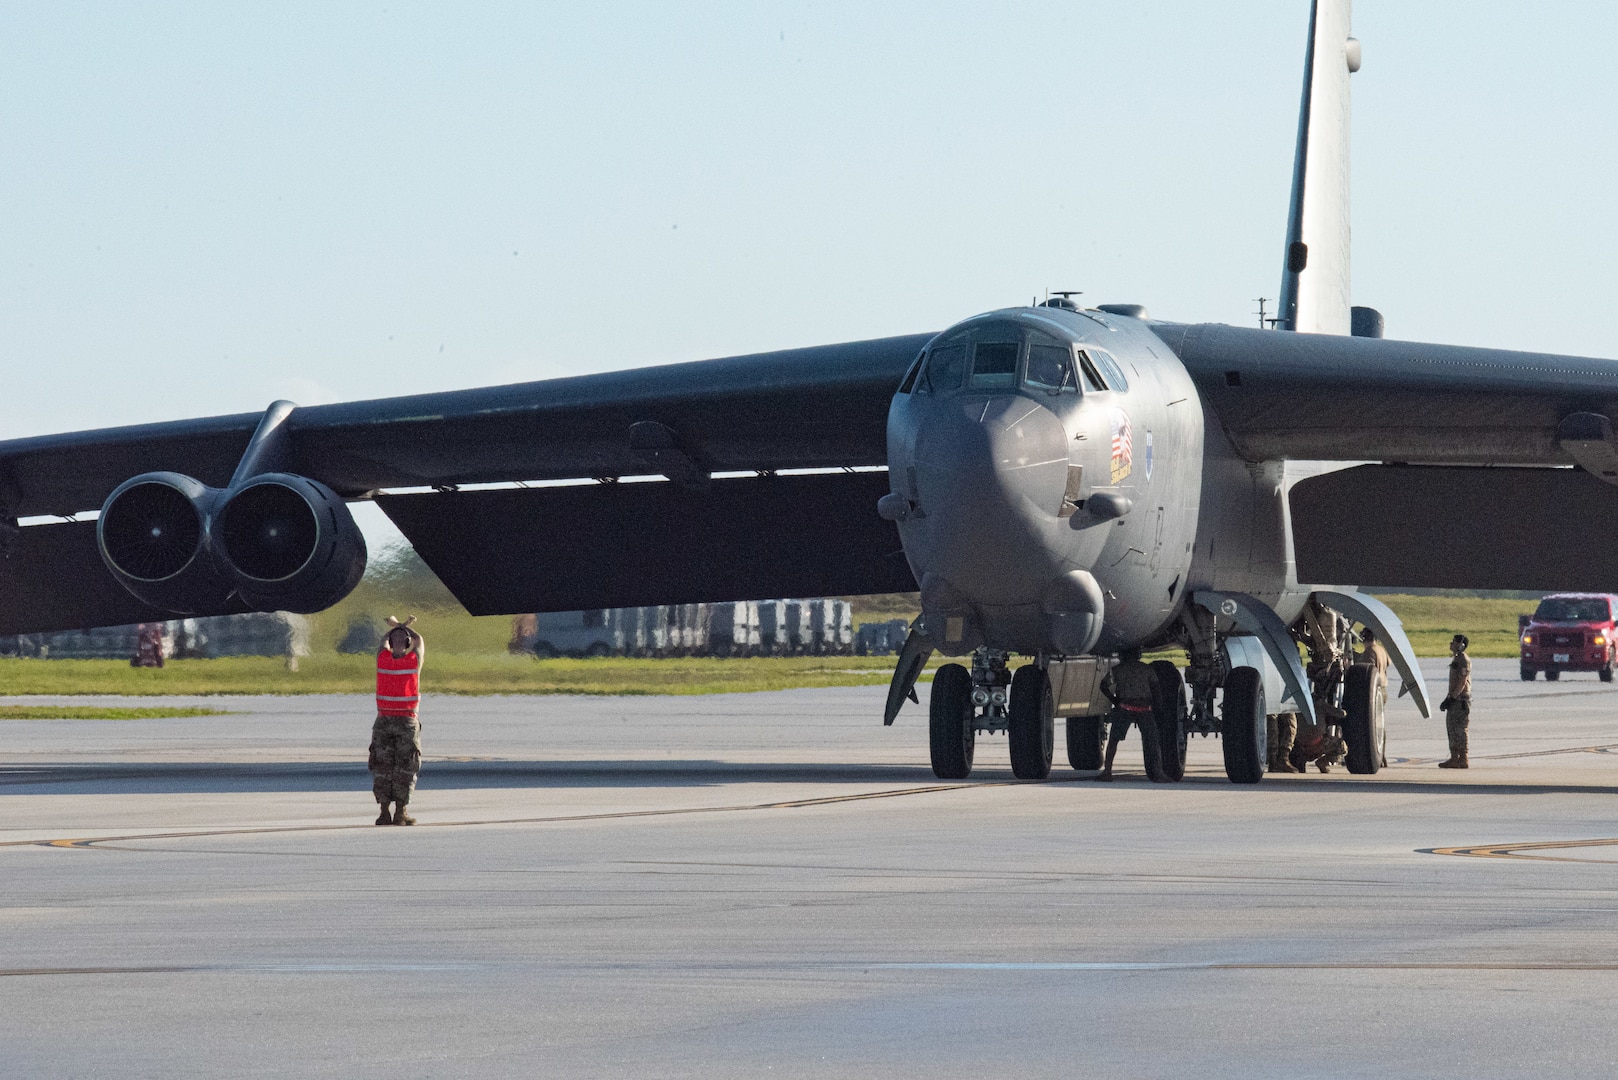 Airmen from the 2nd Maintenance Squadron prepare a B-52 Stratofortress for maintenance on a flight line in support of a Bomber Task Force mission at Andersen Air Force Base, Guam, Feb. 9th, 2022. Bomber missions contribute to joint force lethality and deter aggression in the Indo-Pacific by demonstrating U.S. Air Force ability to operate anywhere in the world at any time in support of the National Defense Strategy. . (U.S. Air Force photo by Senior Airman Jonathan E. Ramos)